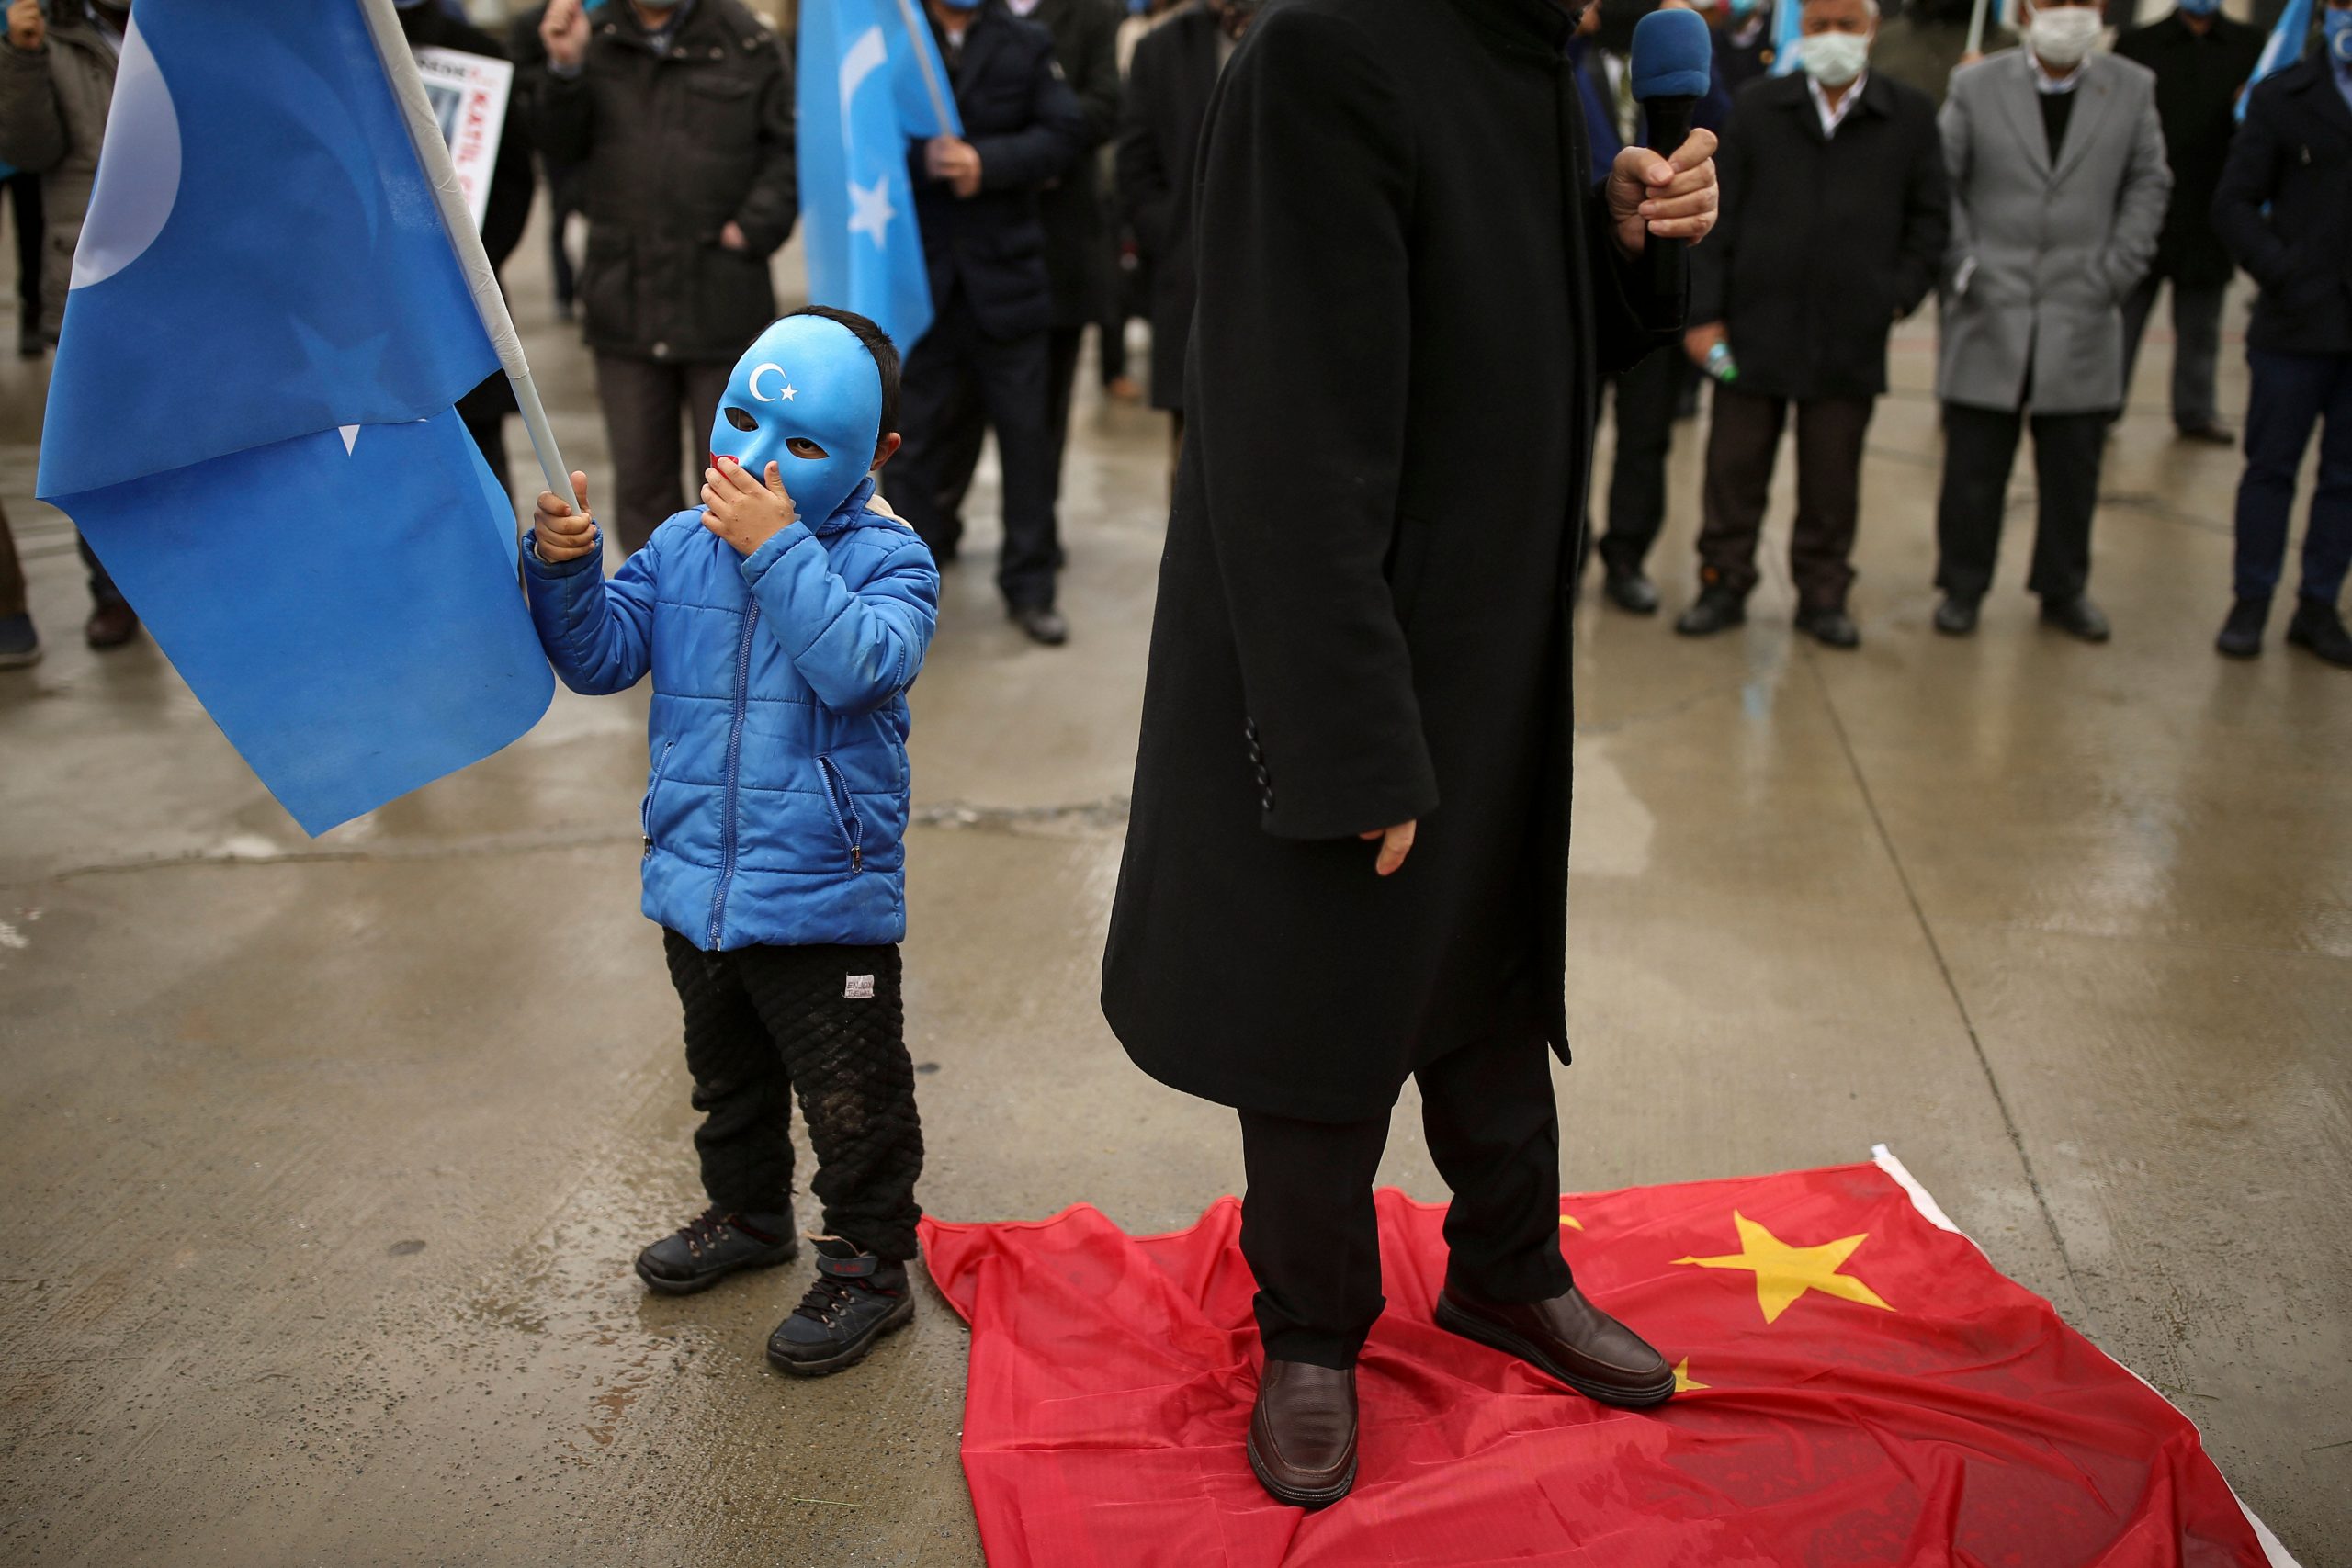 ‘Baseless’: US condemns China’s sanctions against 2 Americans over Xinjiang